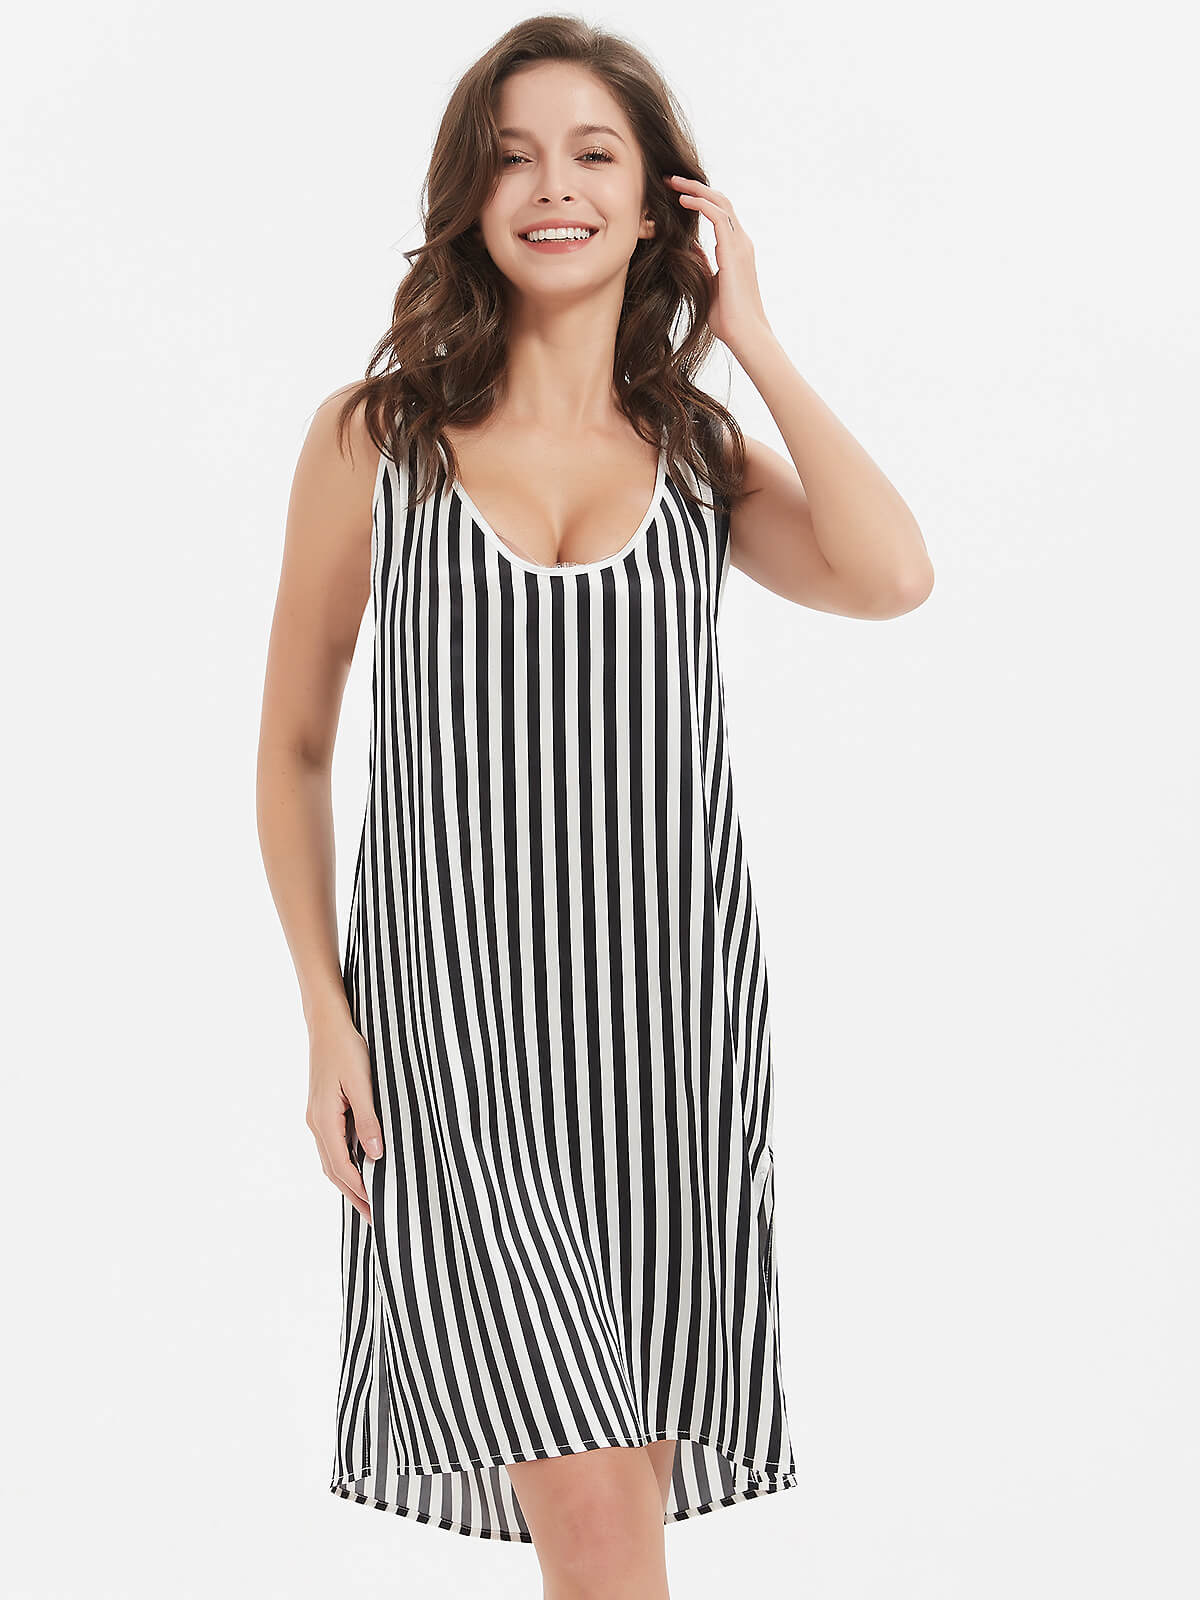 19 Momme Black and White Striped Silk Chemise Nightgown